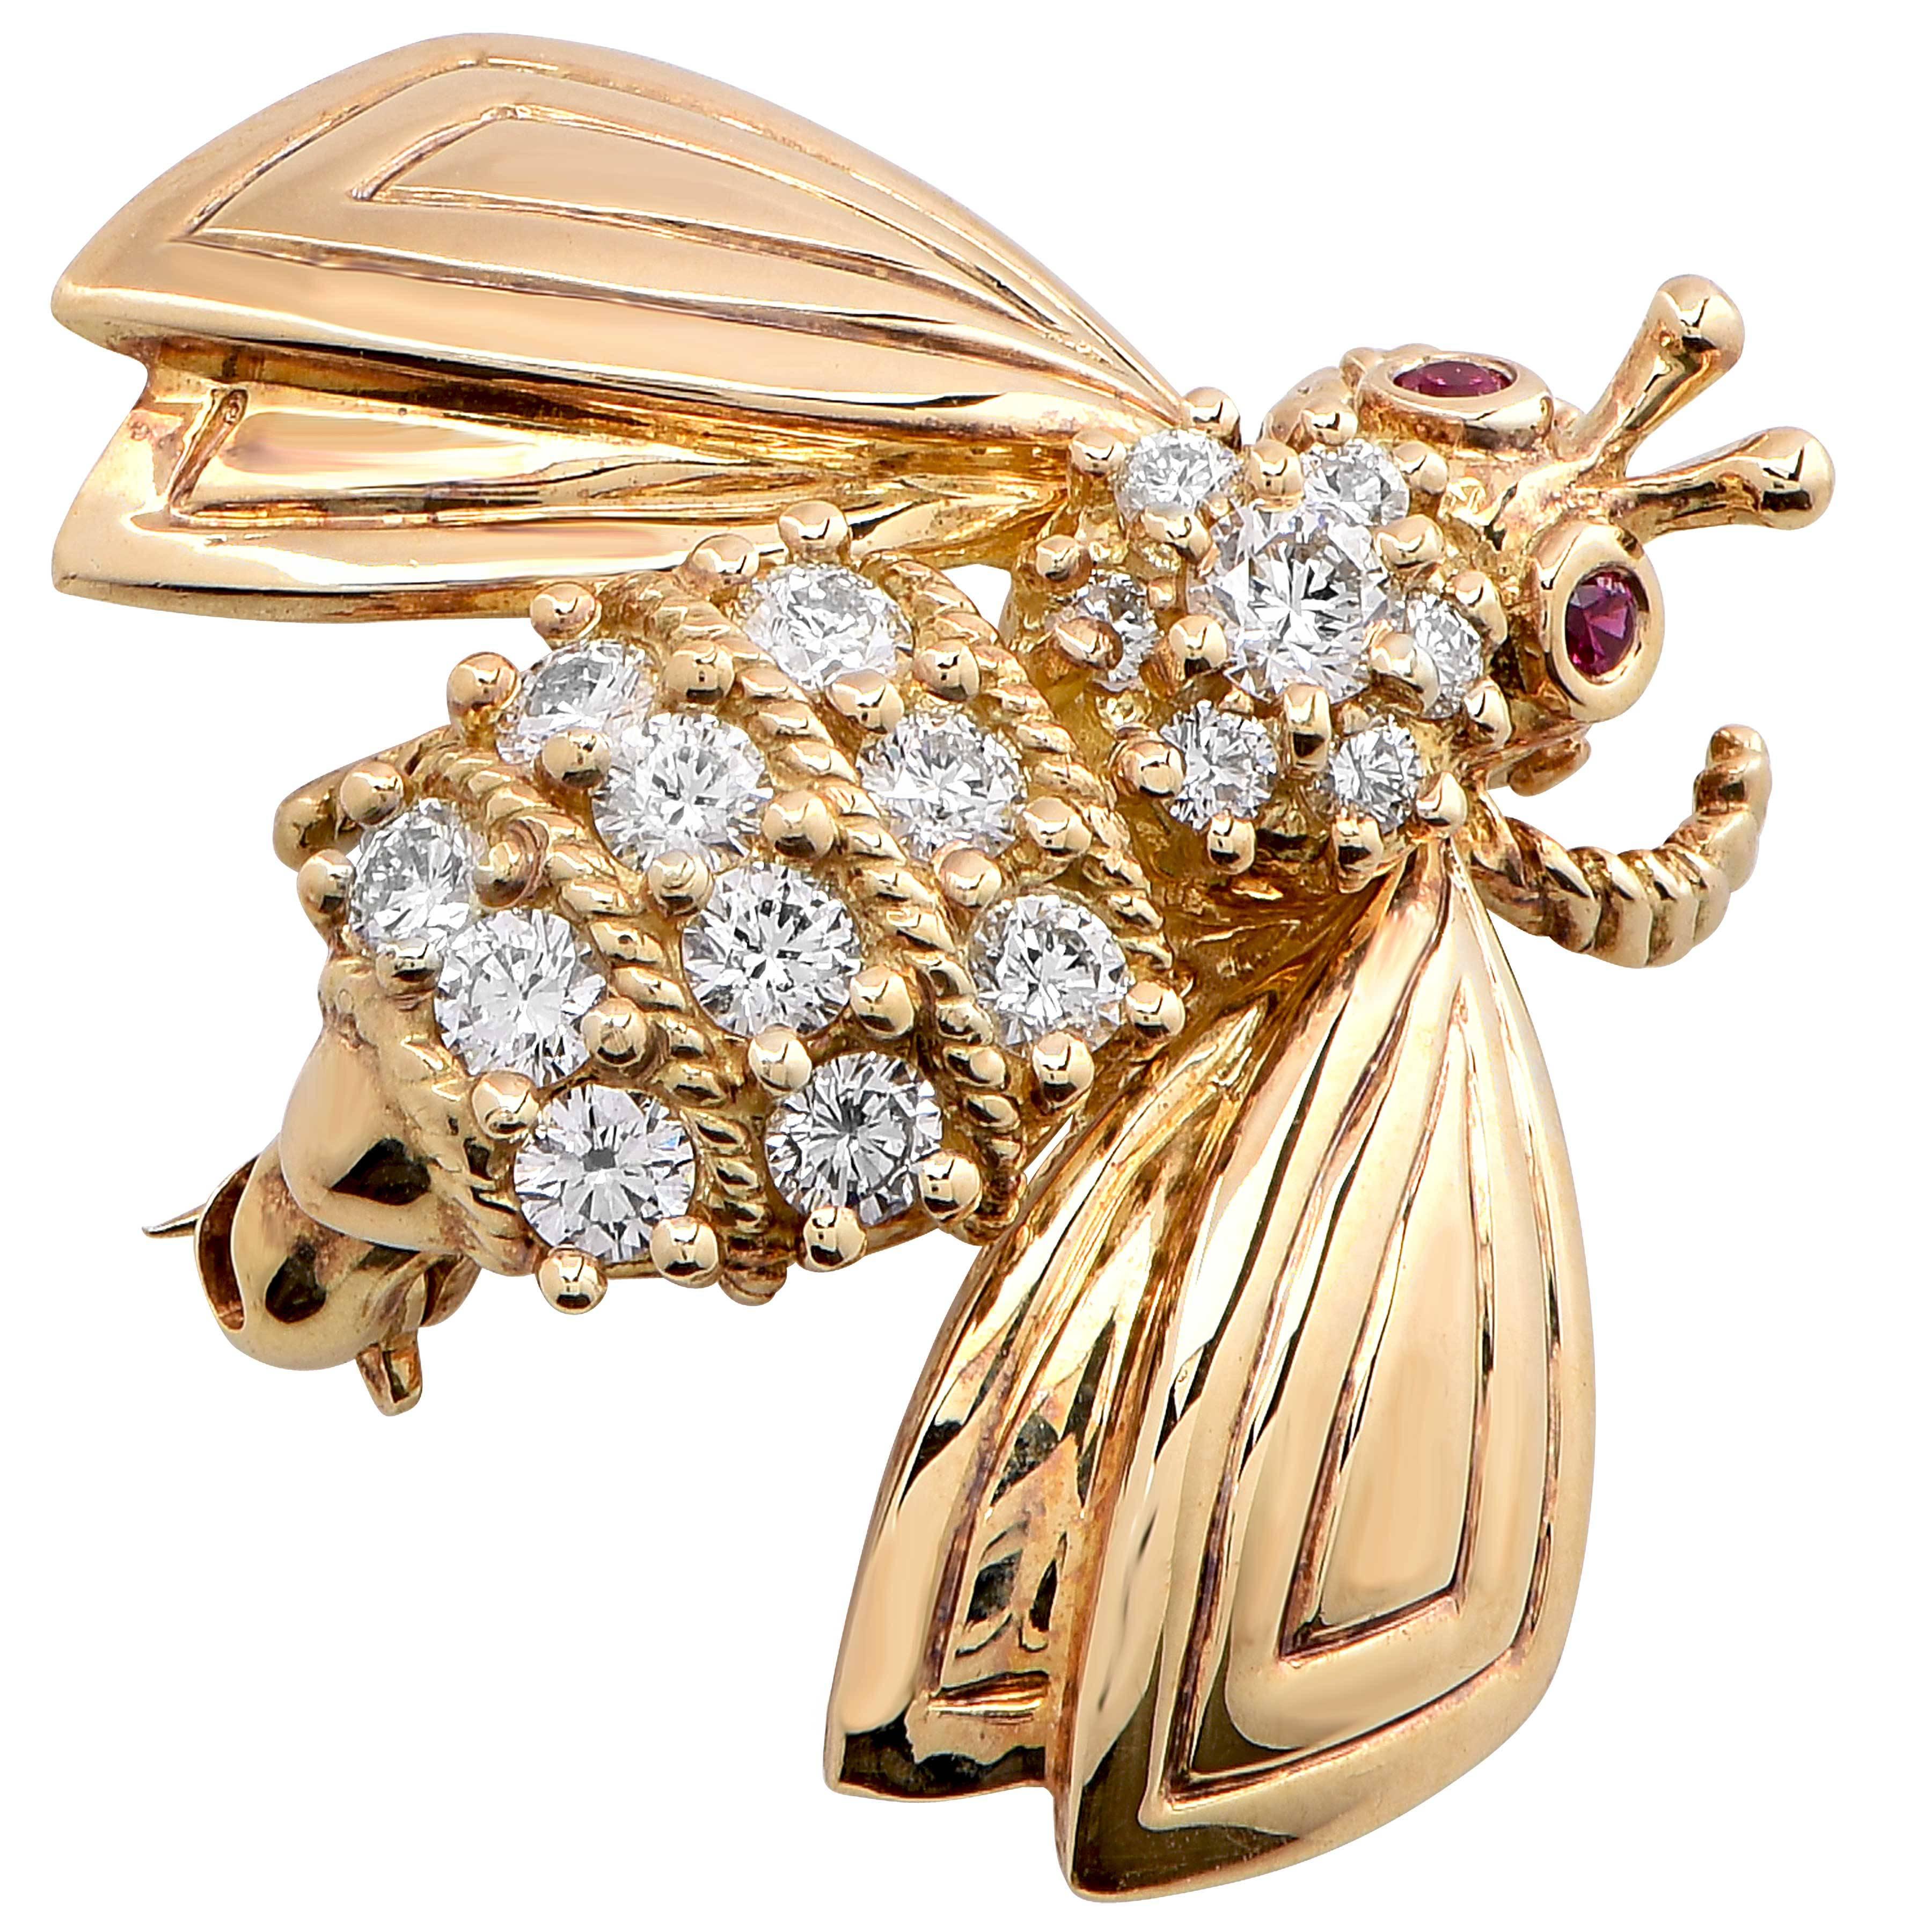 Tiffany & Company 18 karat yellow gold diamond bee brooch. This very lively brooch is set with 17 round brilliant cut diamonds which weigh approximately 0.50 carats and 2 round rubies as the eyes.

Metal Type: 18kt Yellow Gold
Metal Weight: 7.2 grams